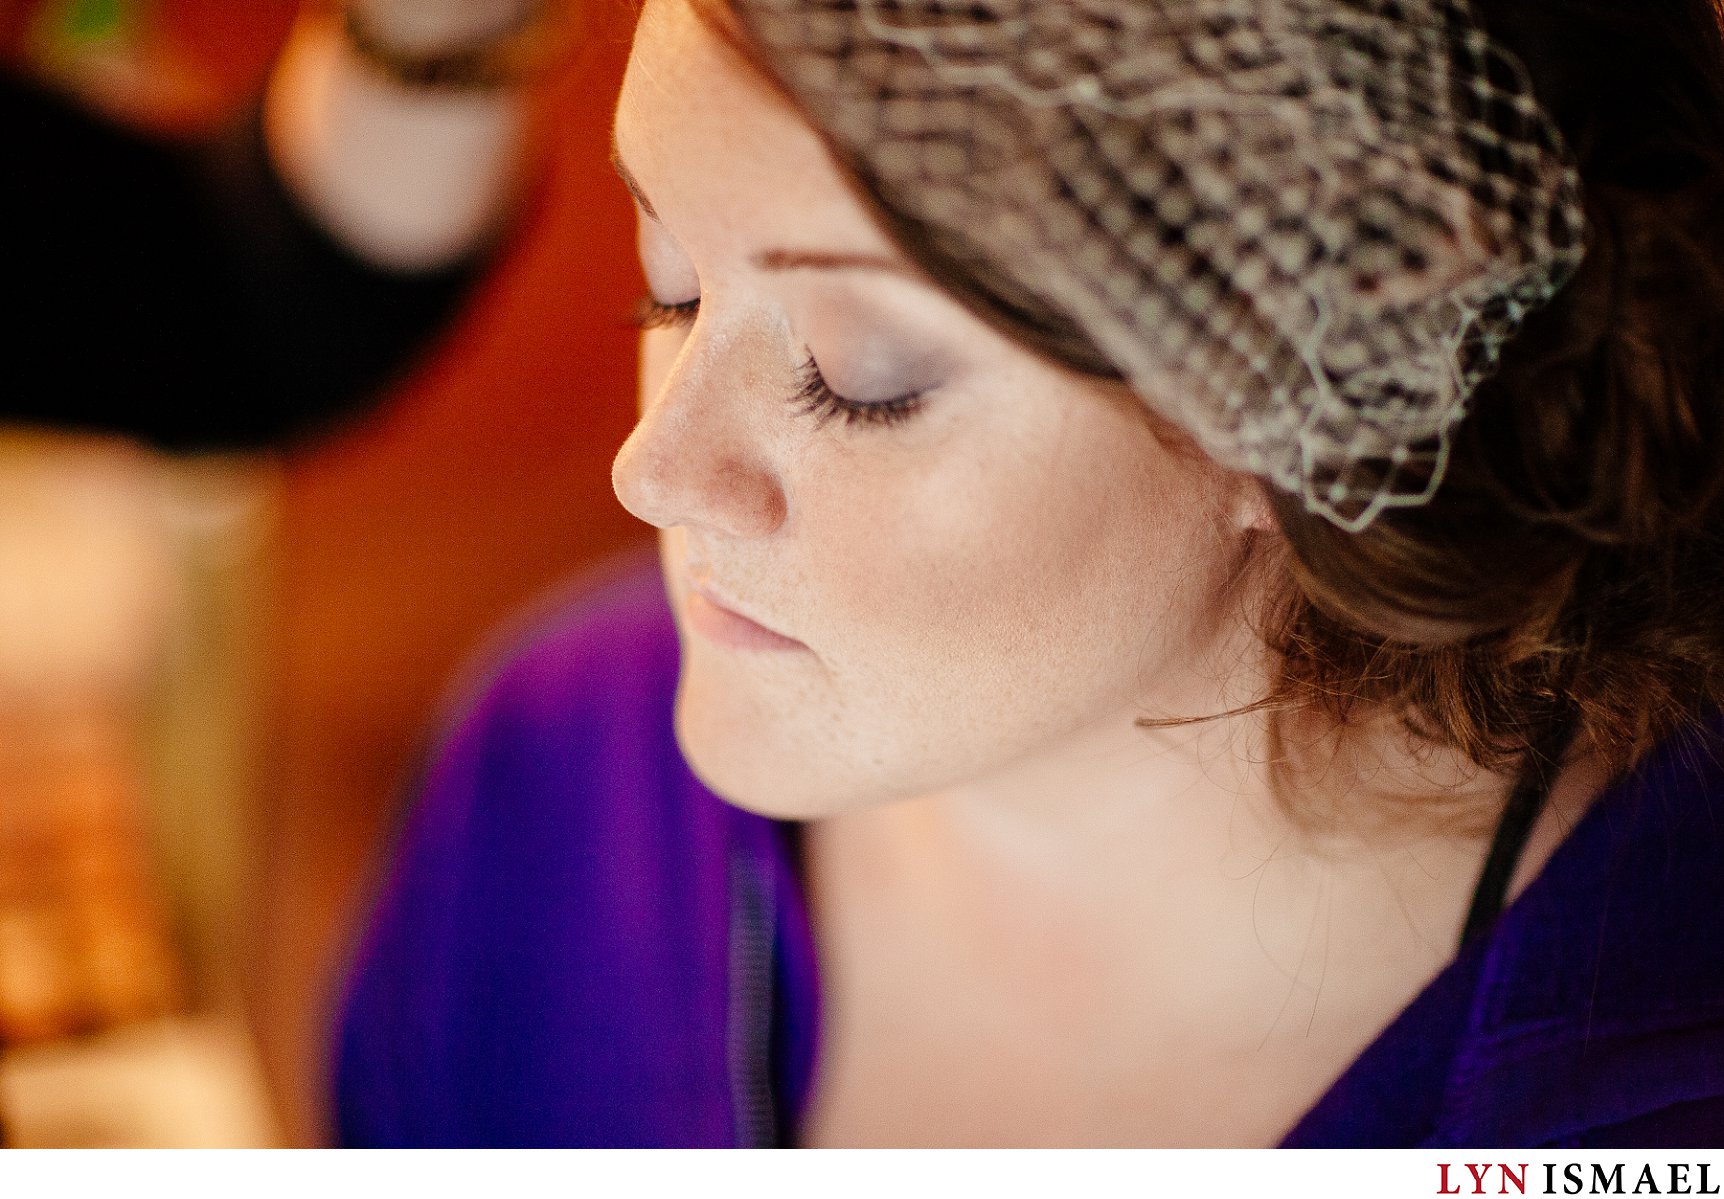 The bride getting her makeup done before her wedding ceremony at Cutten Fields in Guelph.